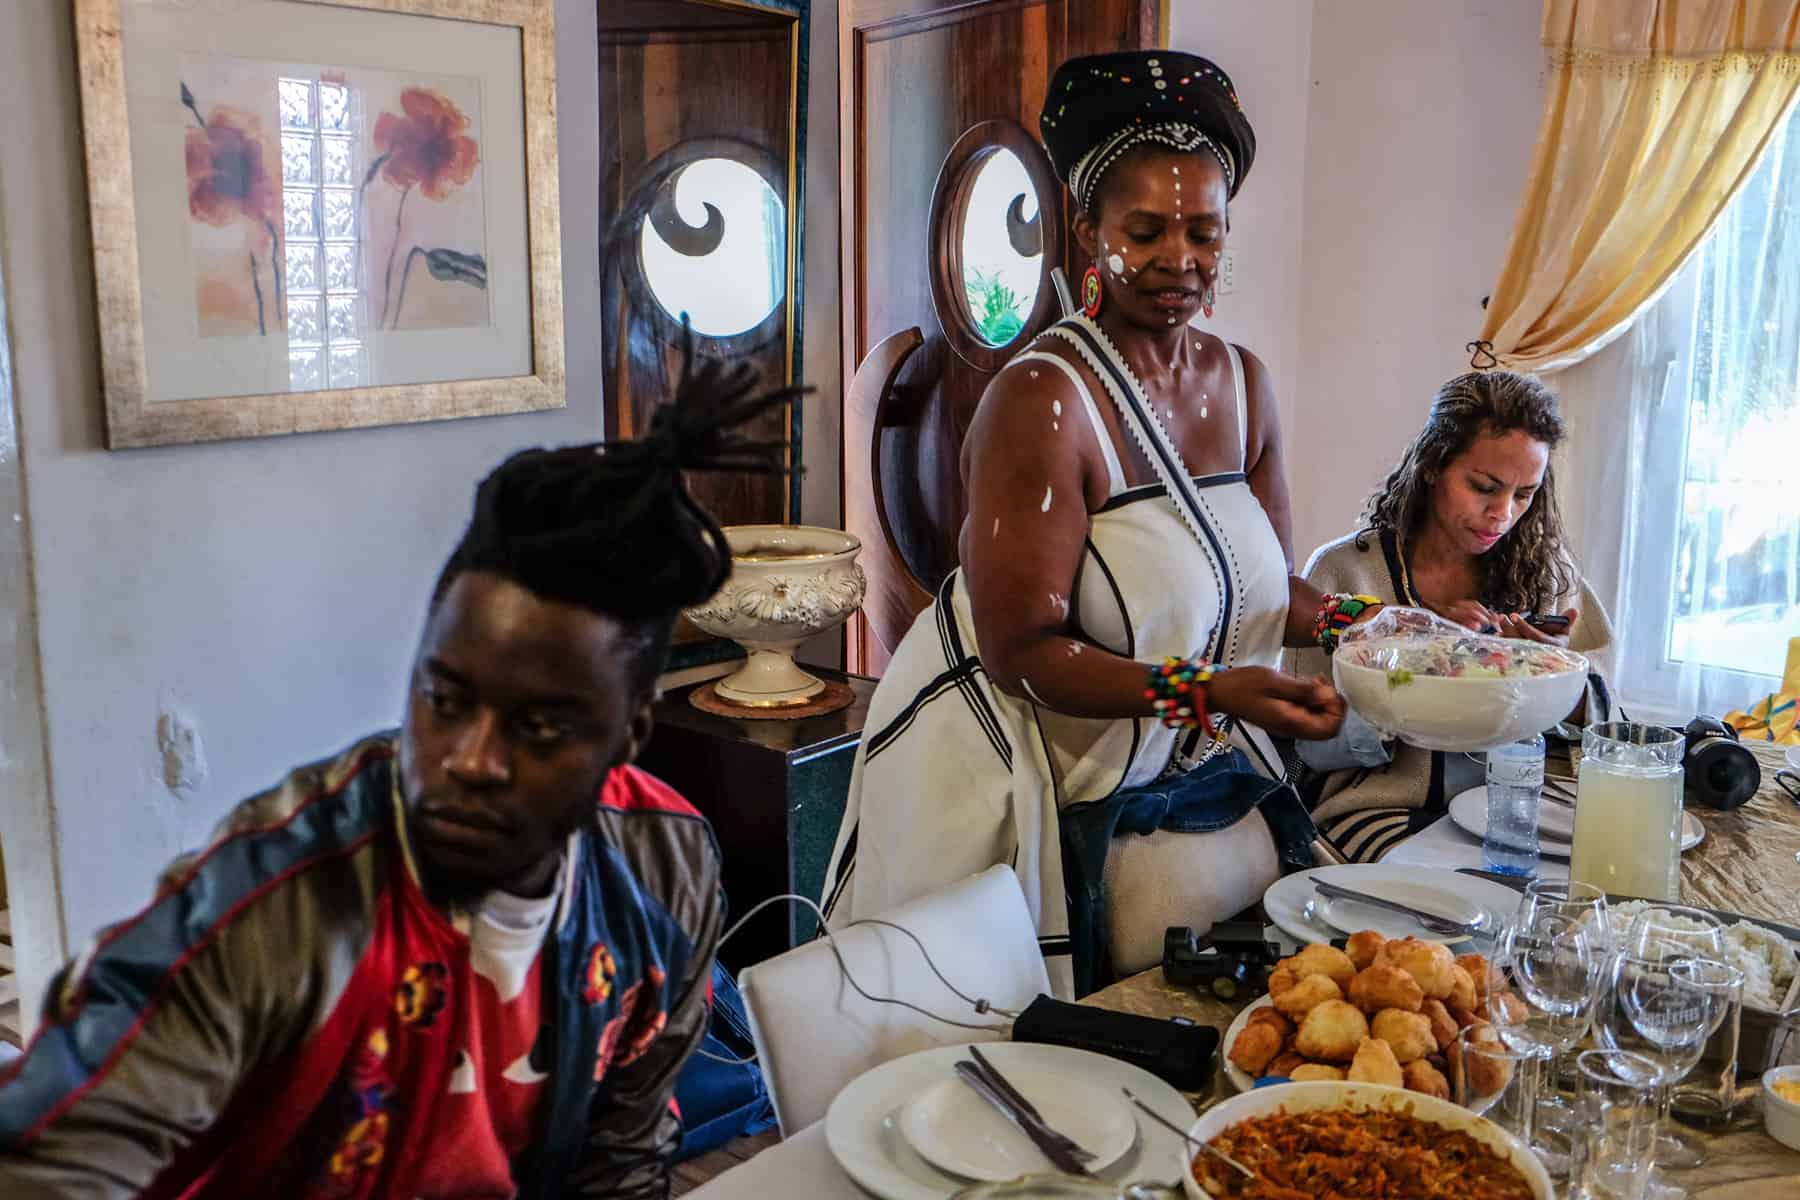 A woman wearing a white dress serves a bowl of food at a dibber spread in her home in Kayamandi township in South Africa. A man sits on the left and a woman to the right, with more bowls of food in front of them 